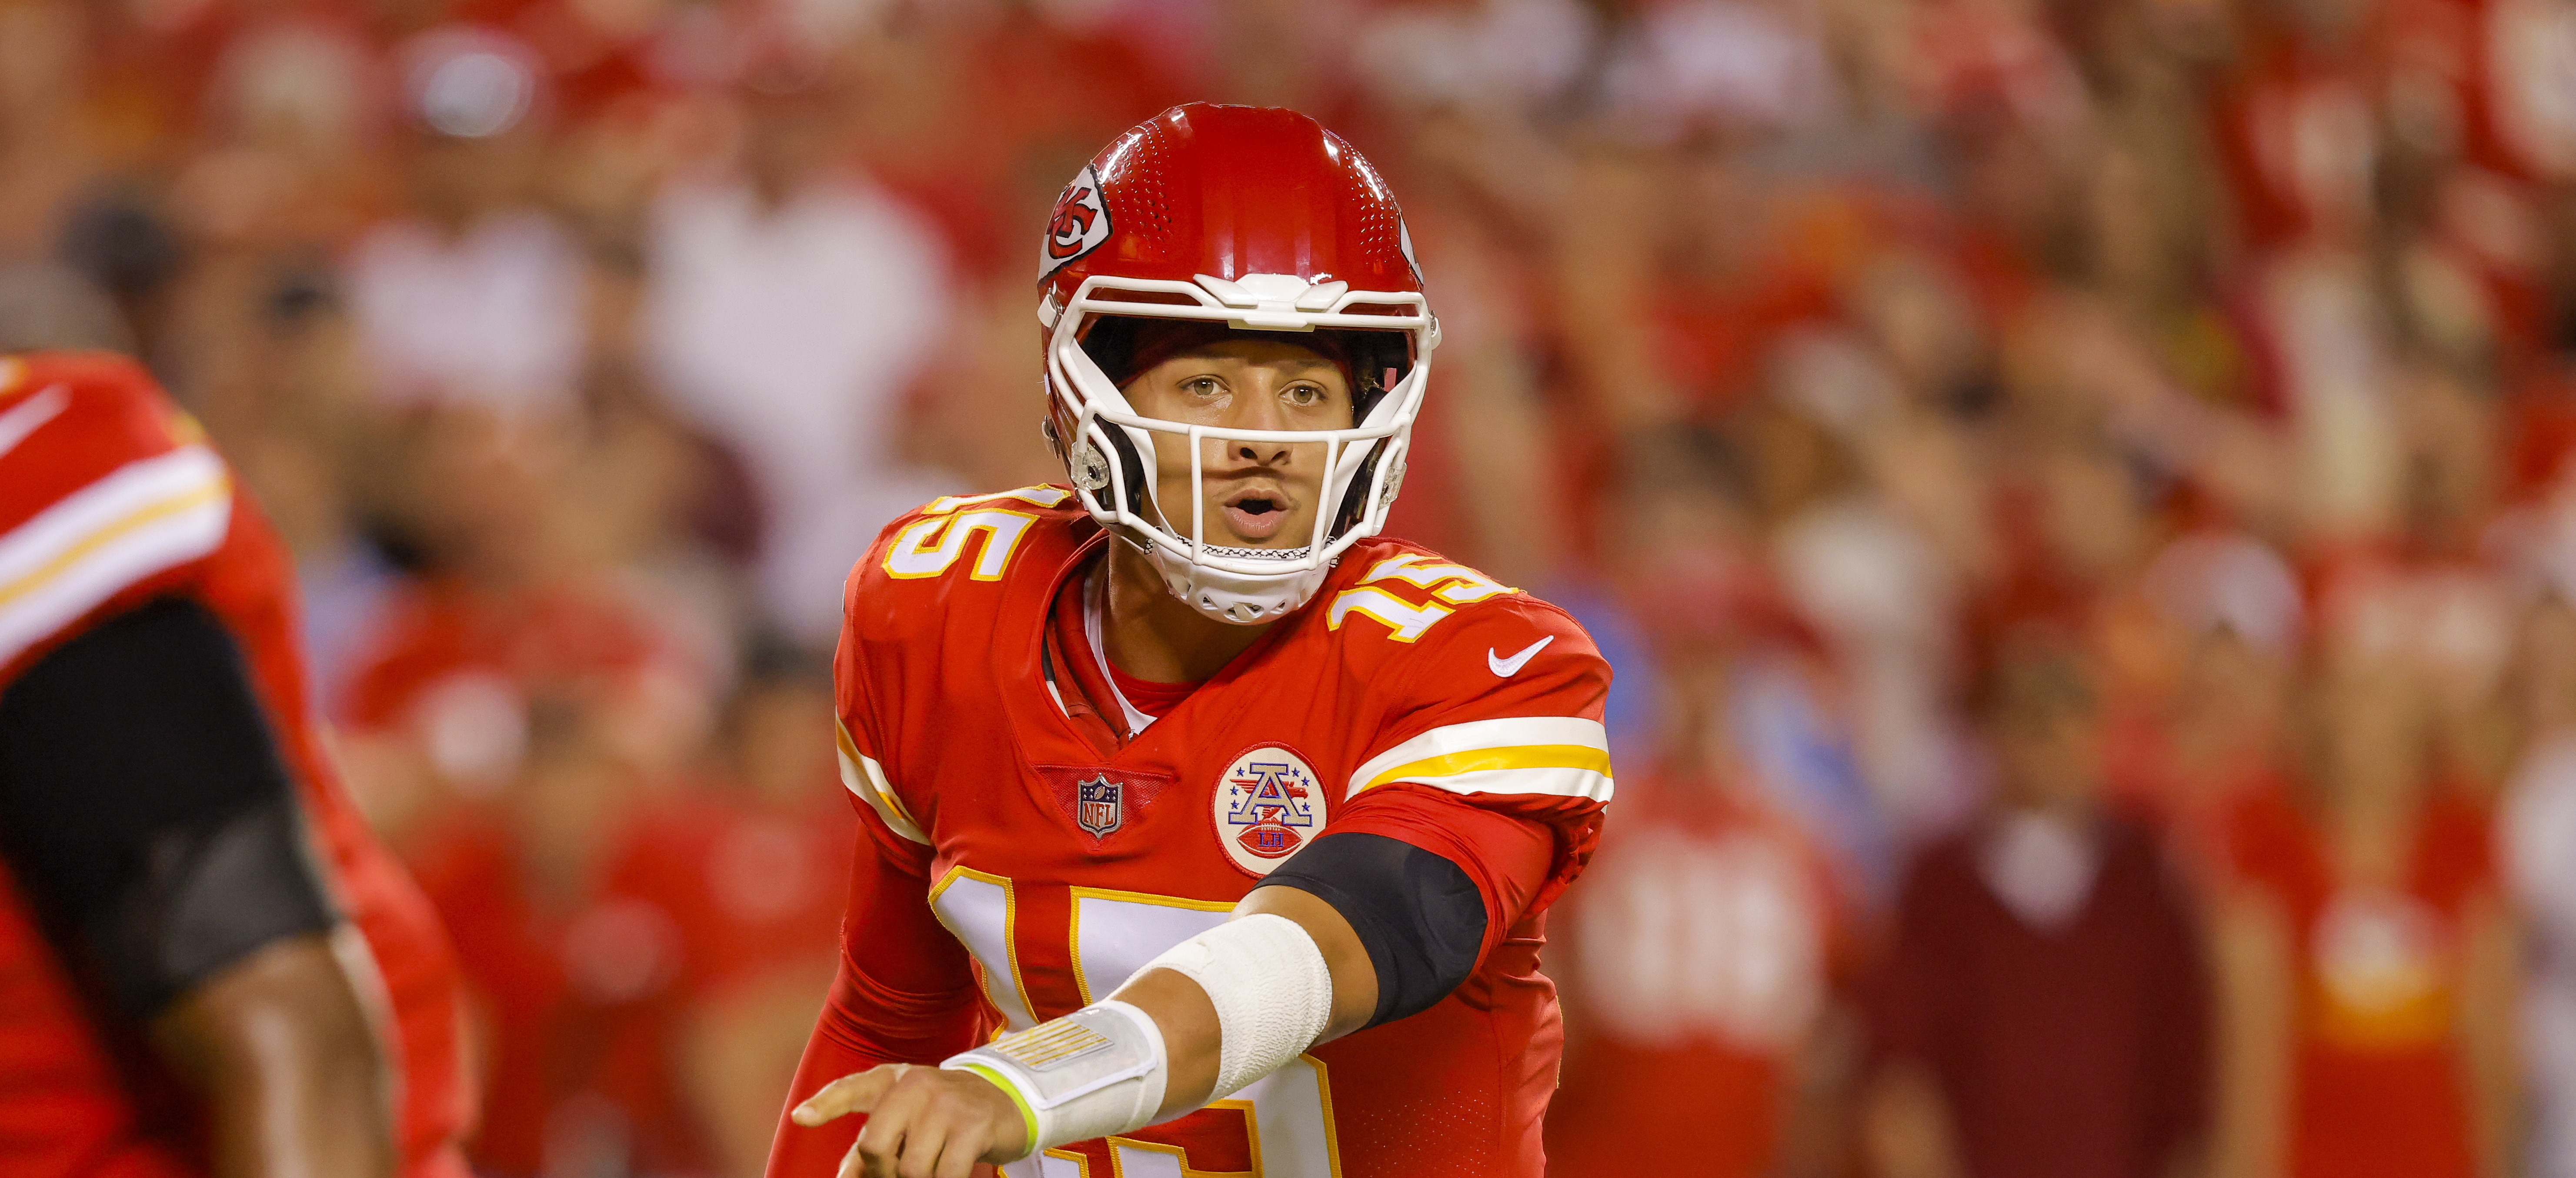 Colts at Chiefs Week 3 Preview and Prediction